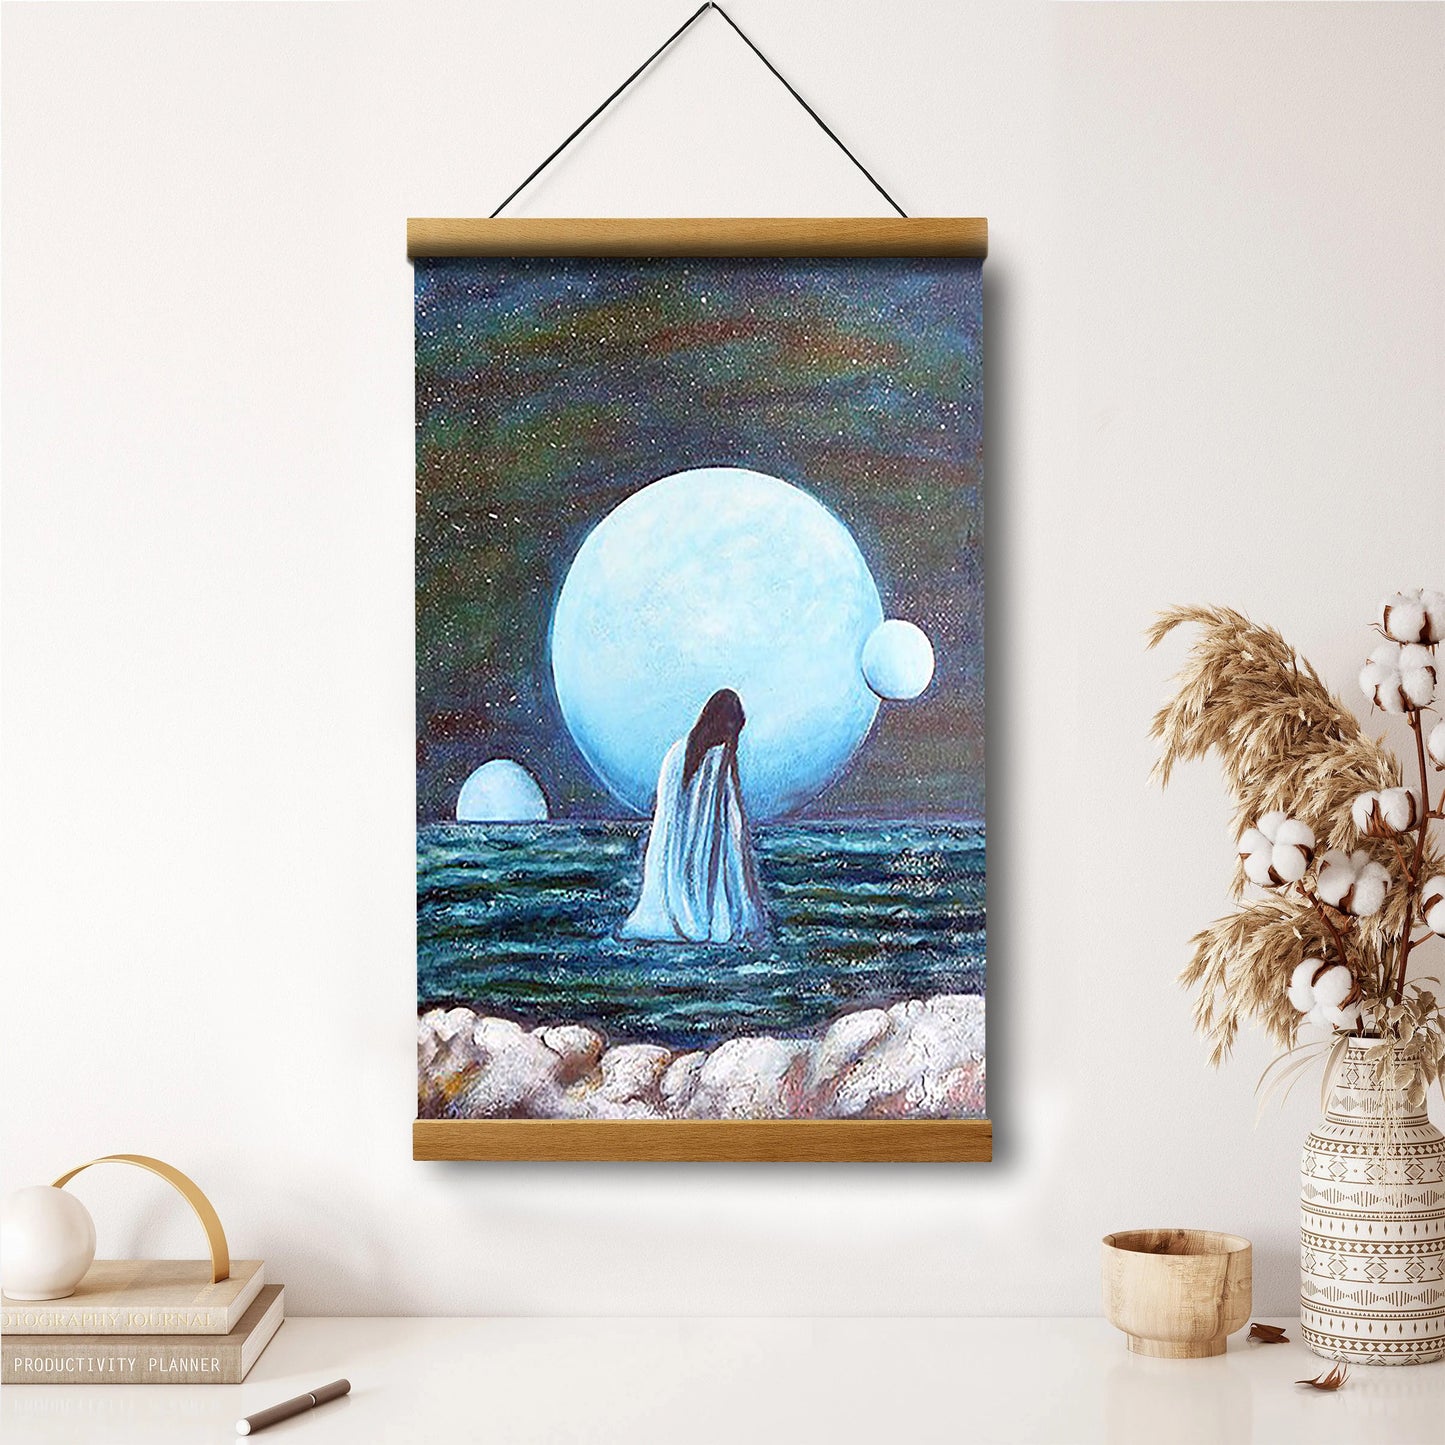 Woman And Planets Painting Hanging Canvas Wall Art - Canvas Wall Decor - Home Decor Living Room